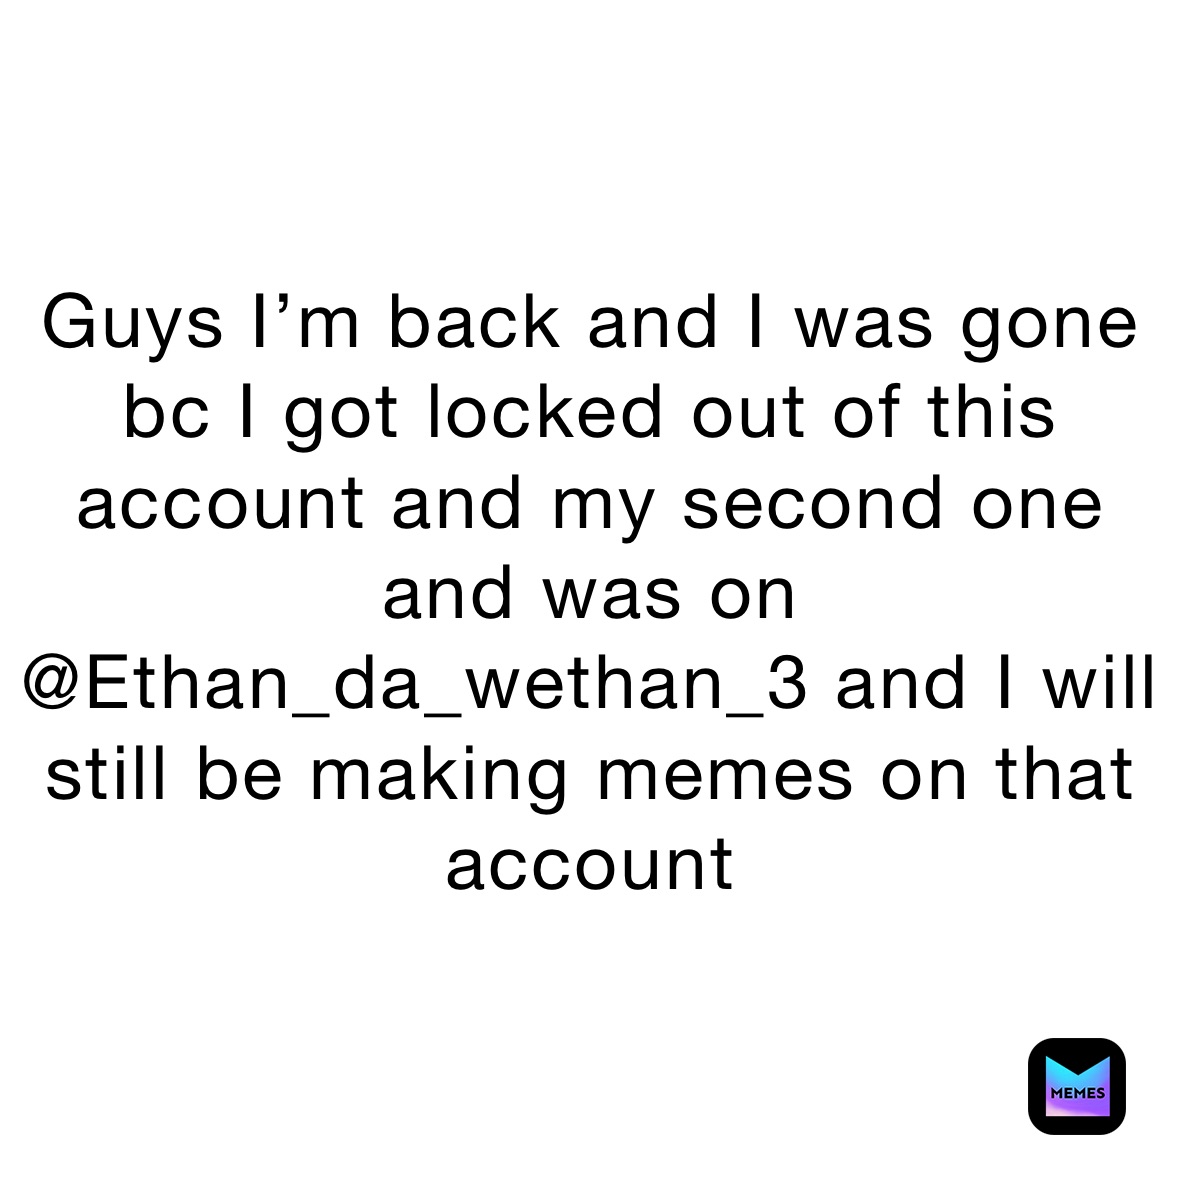 Guys I’m back and I was gone bc I got locked out of this account and my second one and was on @Ethan_da_wethan_3 and I will still be making memes on that account 